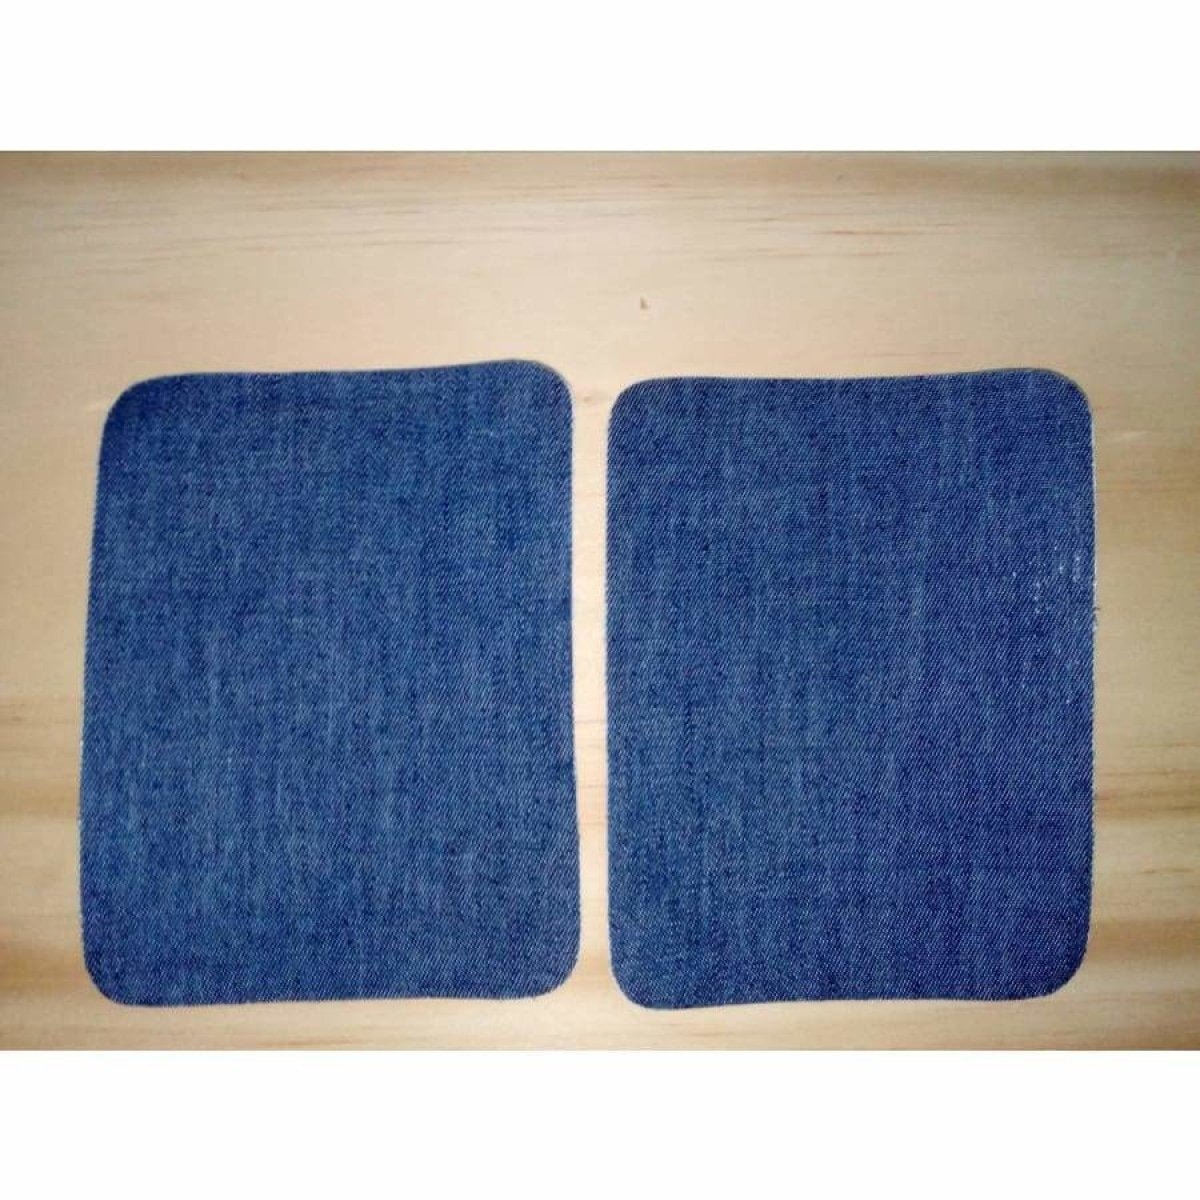 2pcs Iron-on Fabric Blue Black Denim Jeans Clothing Jacket Patch Patches Repair Sewing Shapes - 12.5x9.5cm Blue C - - Asia Sell